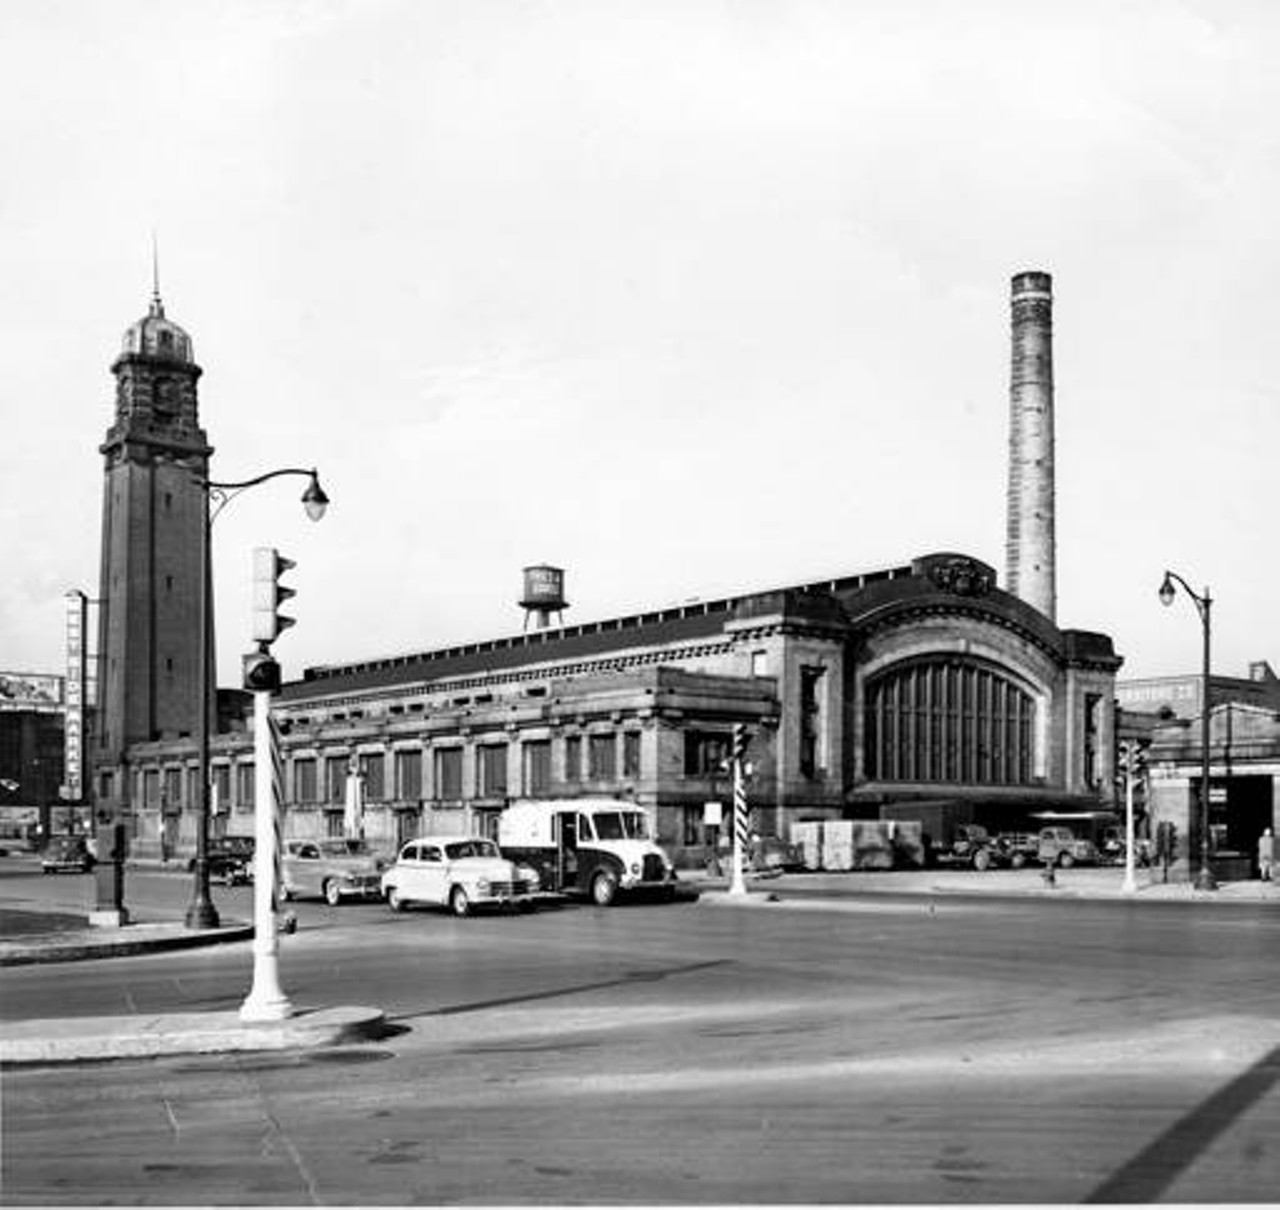 The West Side Market and the intersection of Market Ave. and W. 25th, circa 1950.